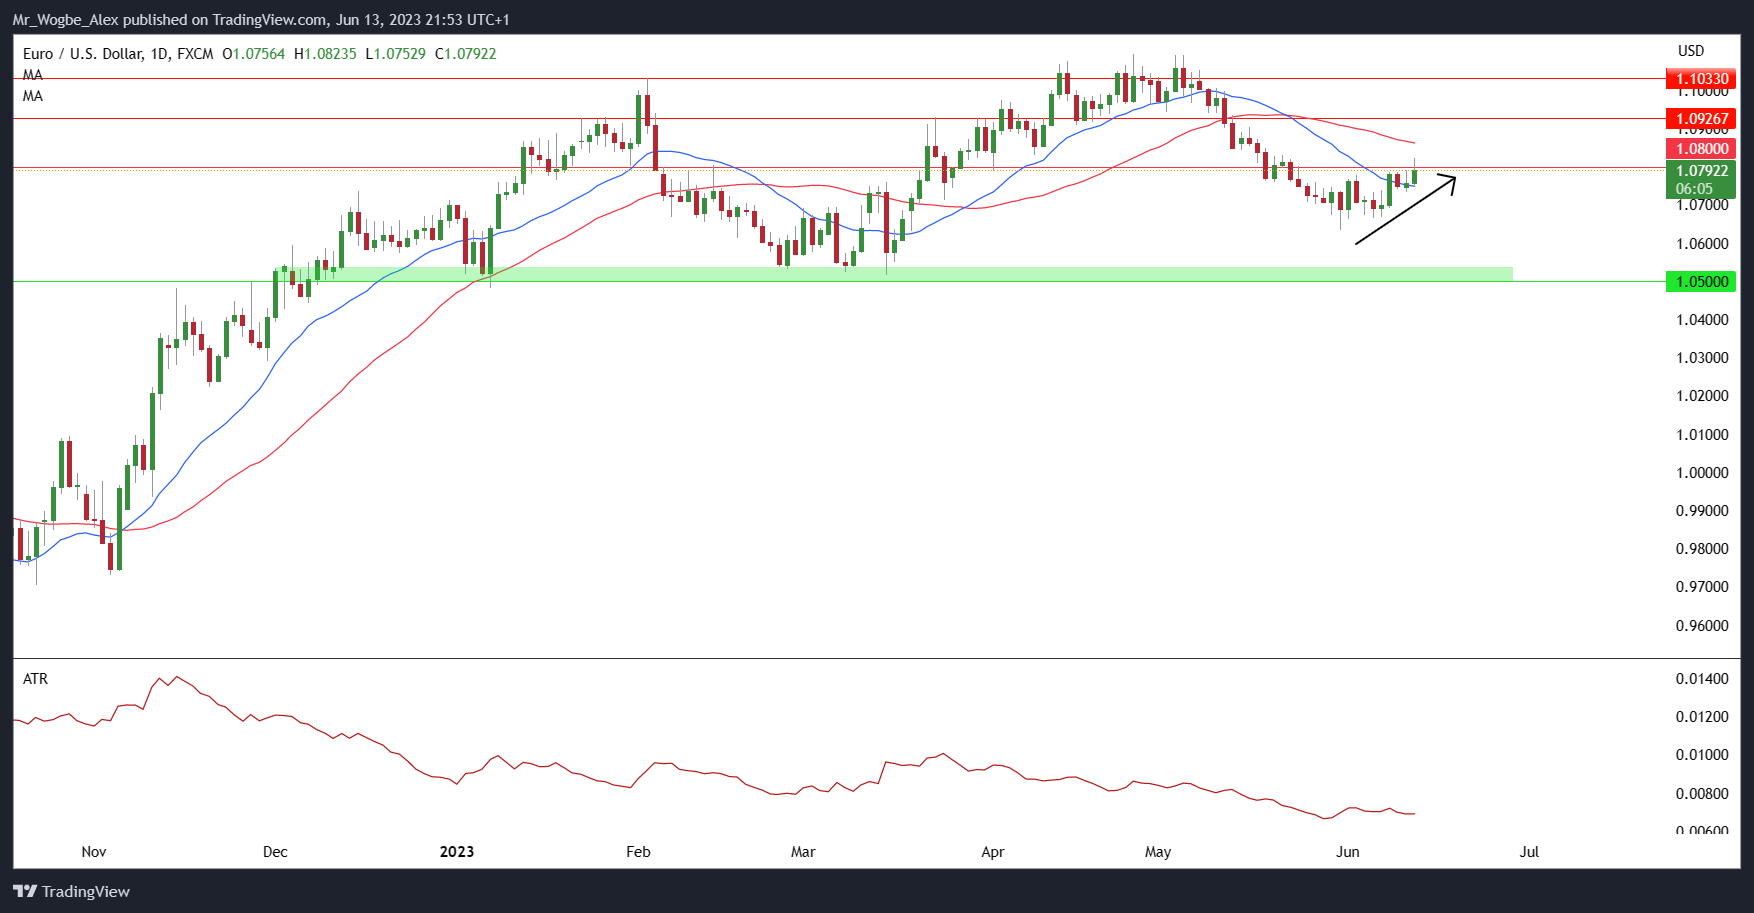 EUR/USD daily chart from TradingView